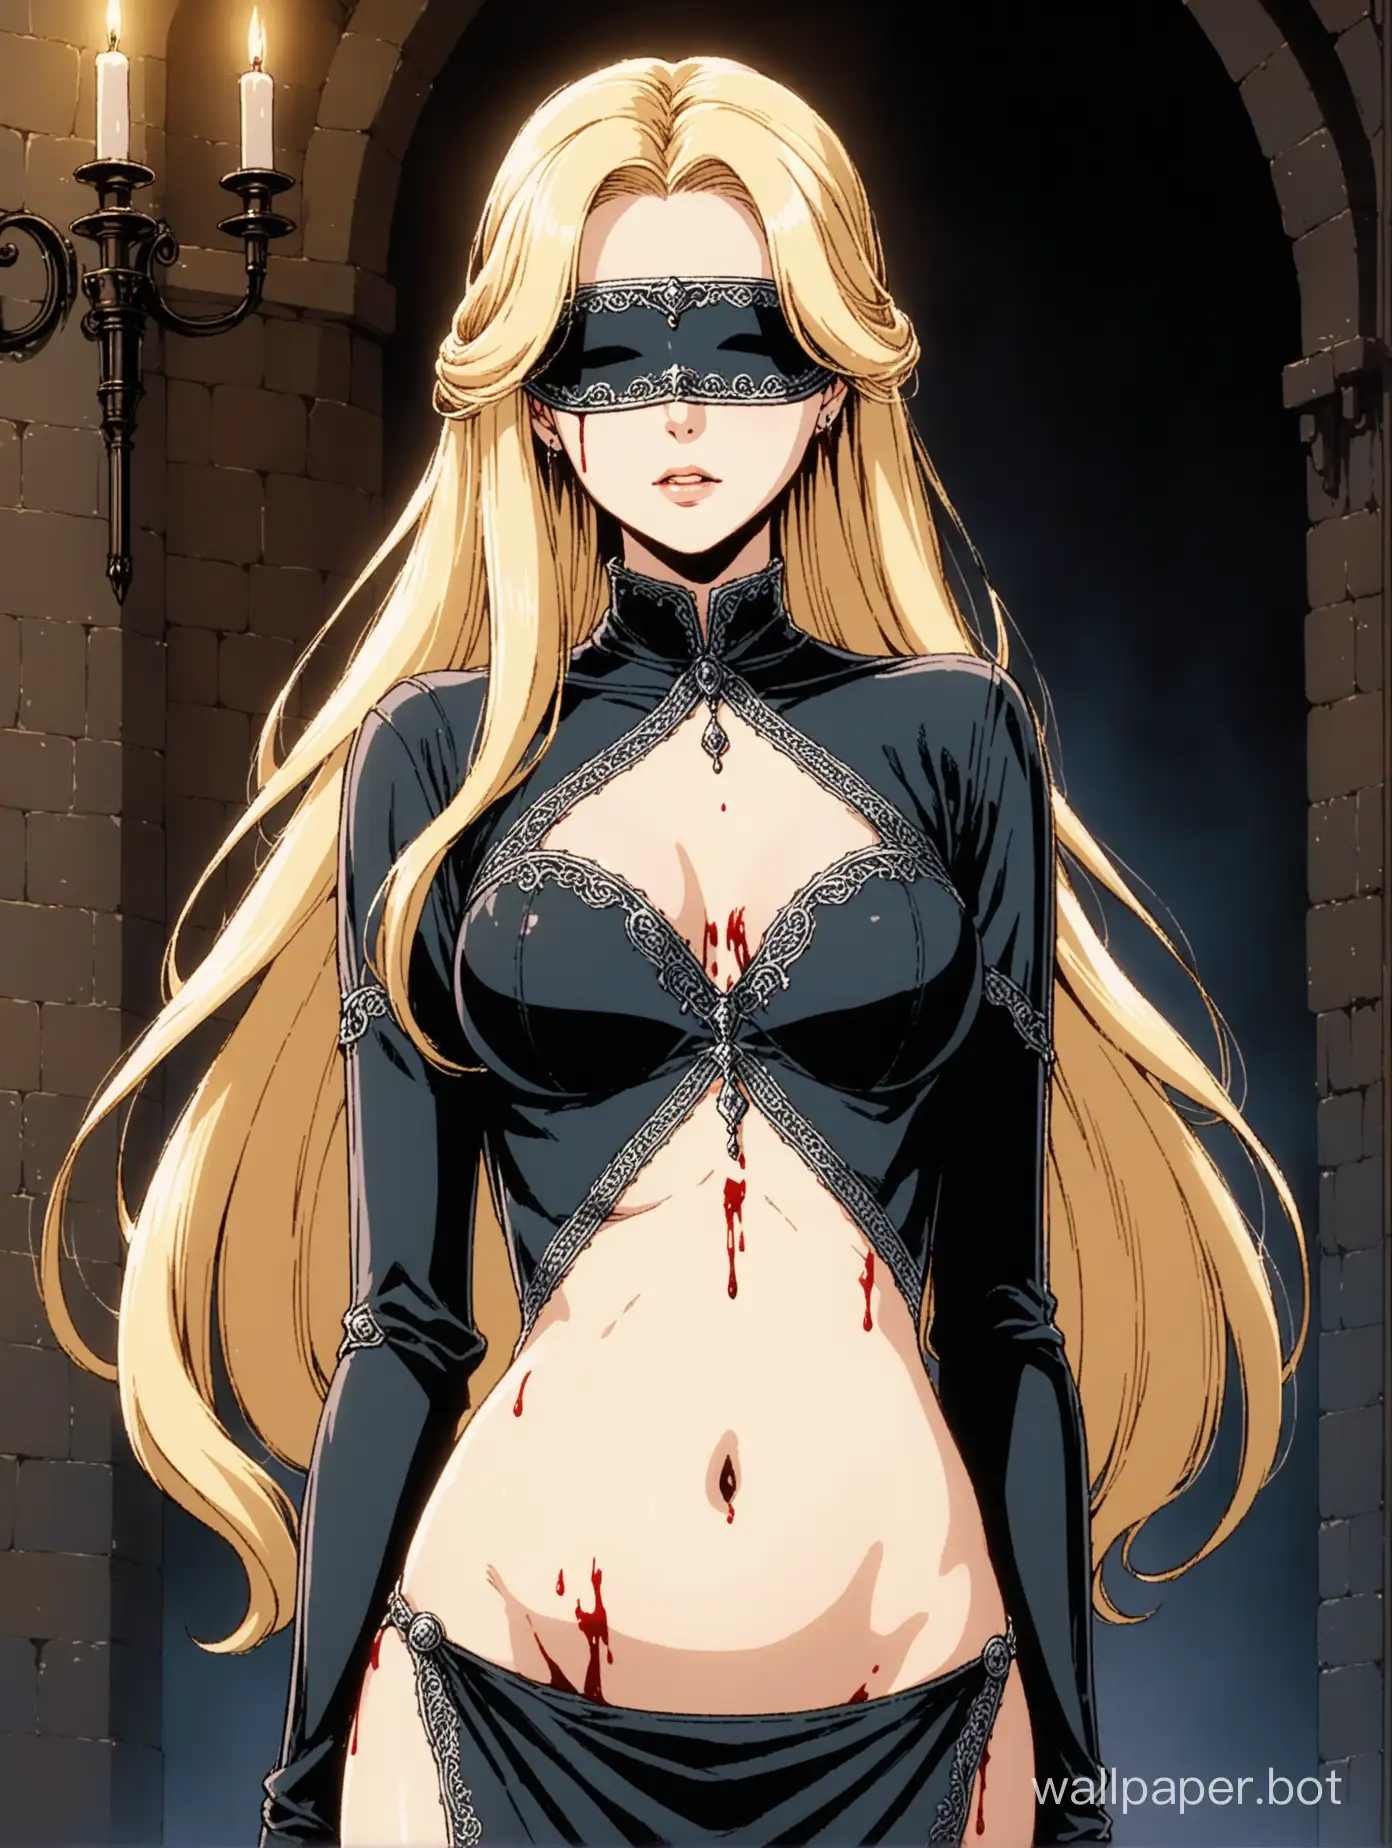 a young and attractive white woman, she has long wavy white-blonde hair, standing regally, elegant and slender, thin sharp face, wearing an ornate metal blindfold, bleeding from underneath her blindfold, blood drippoing down her cheeks, wearing a sheer thin dark grey skintight dress, small diamond-shaped navel cutout, her stomach is exposed, wearing a navel piercing, decorative stitching, medieval elegance, 1980s retro anime